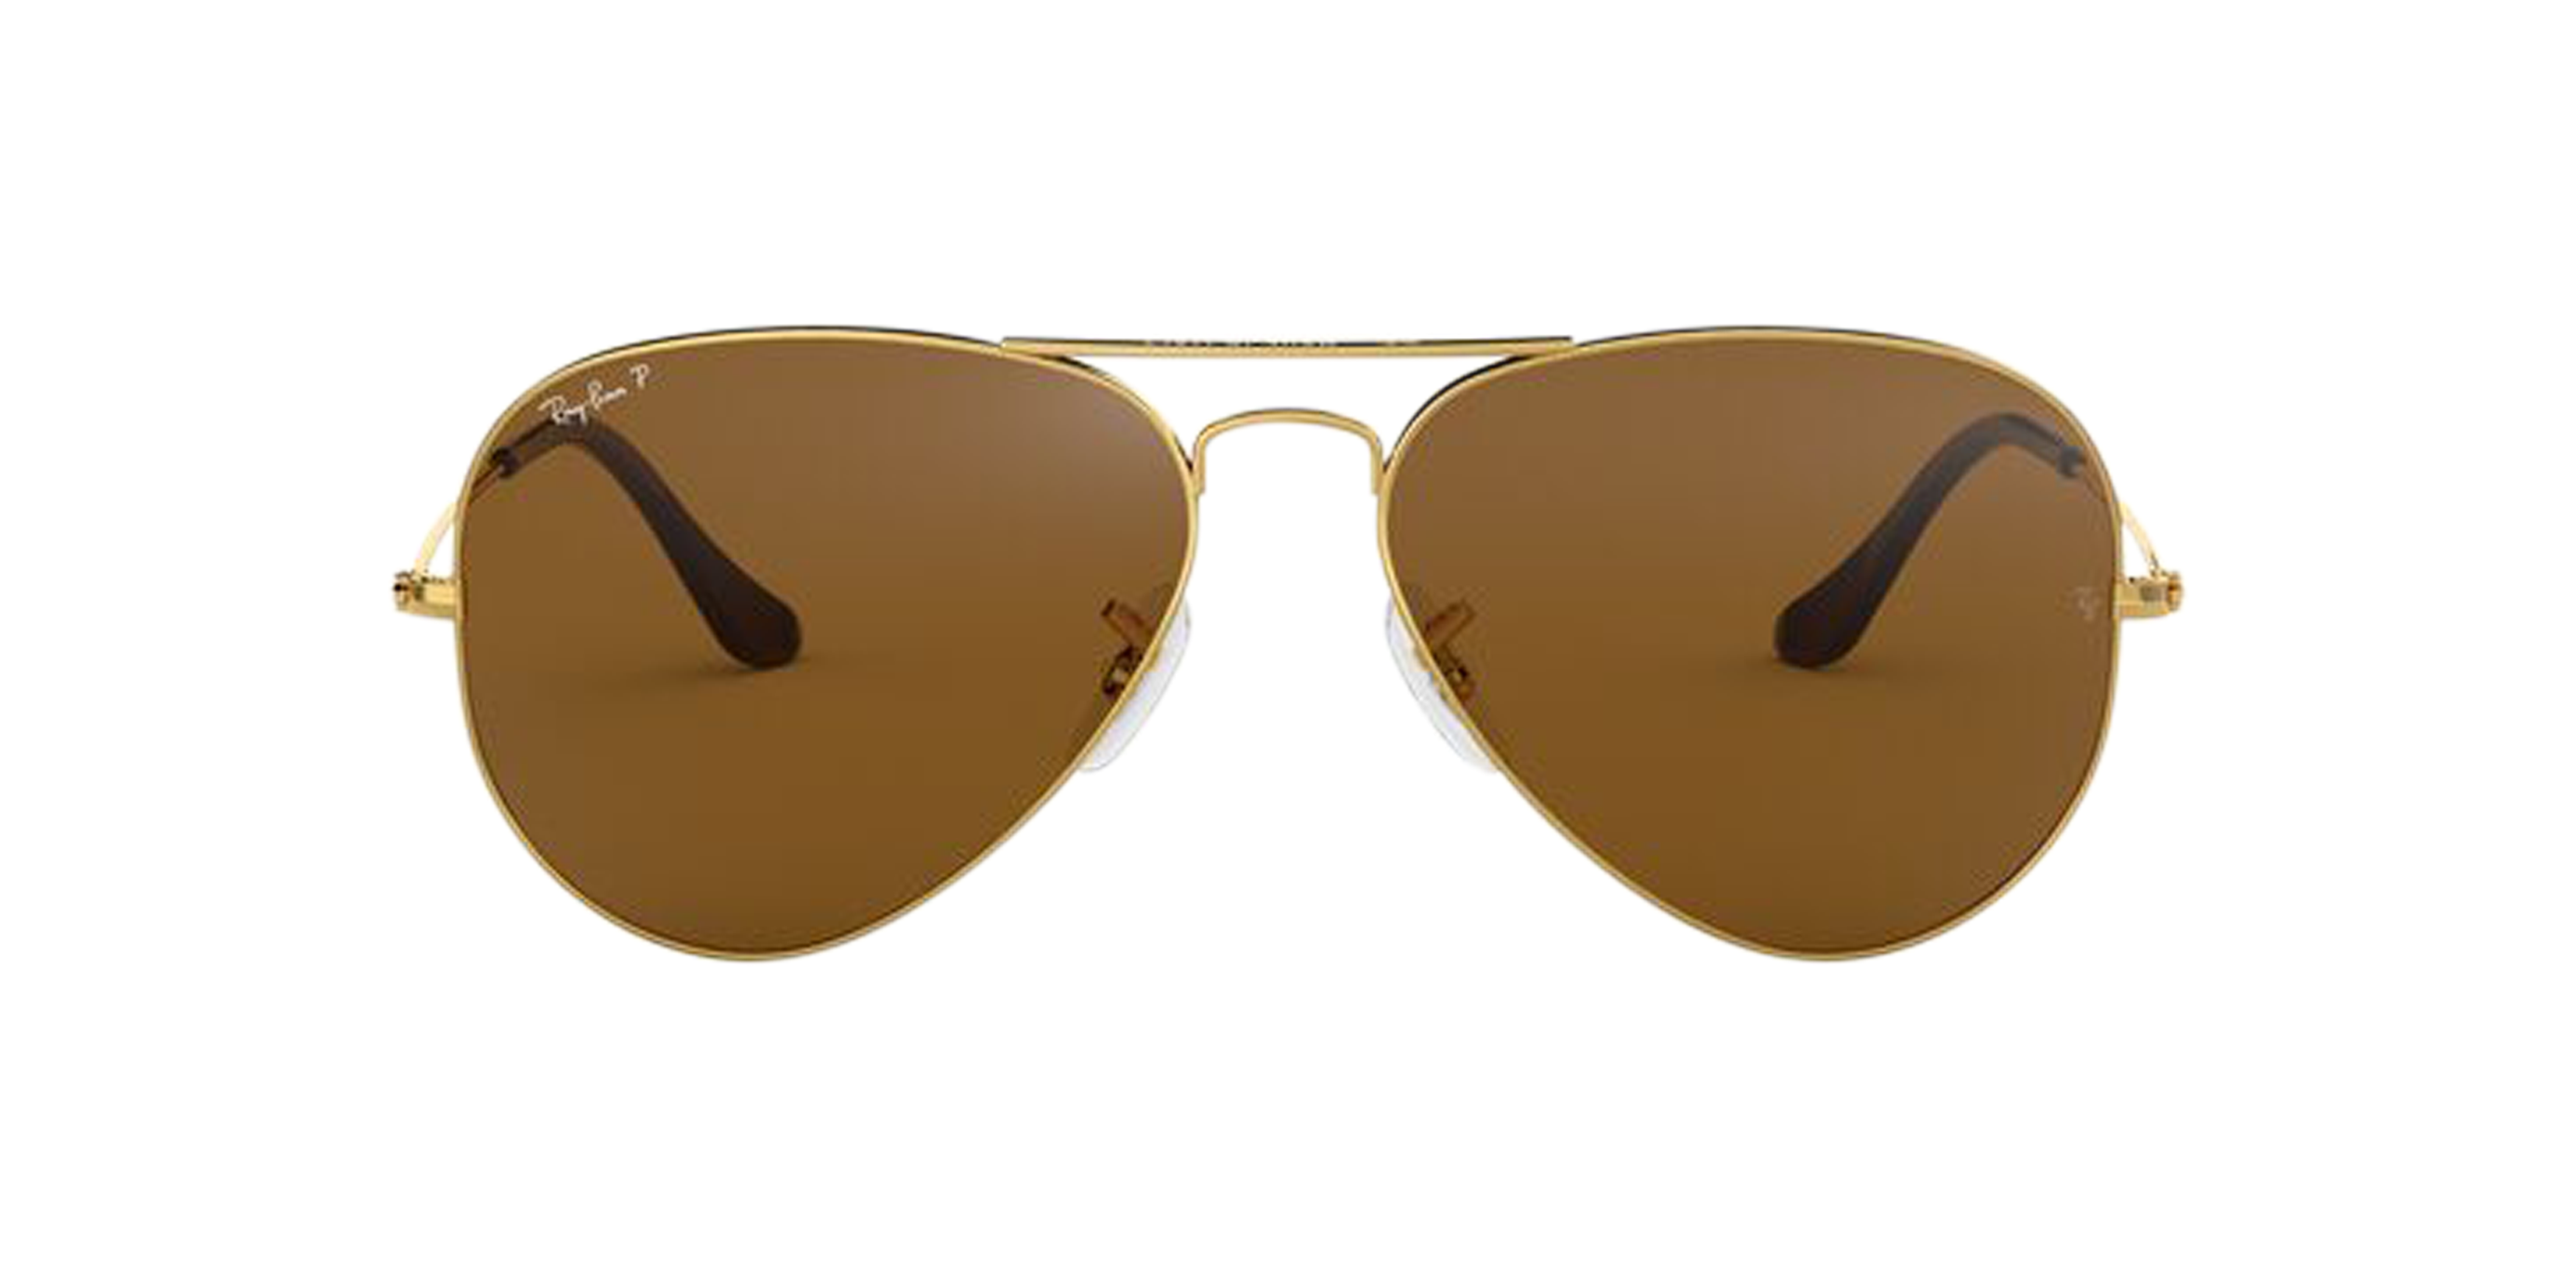 [products.image.front] Ray-Ban RB3025 001/57